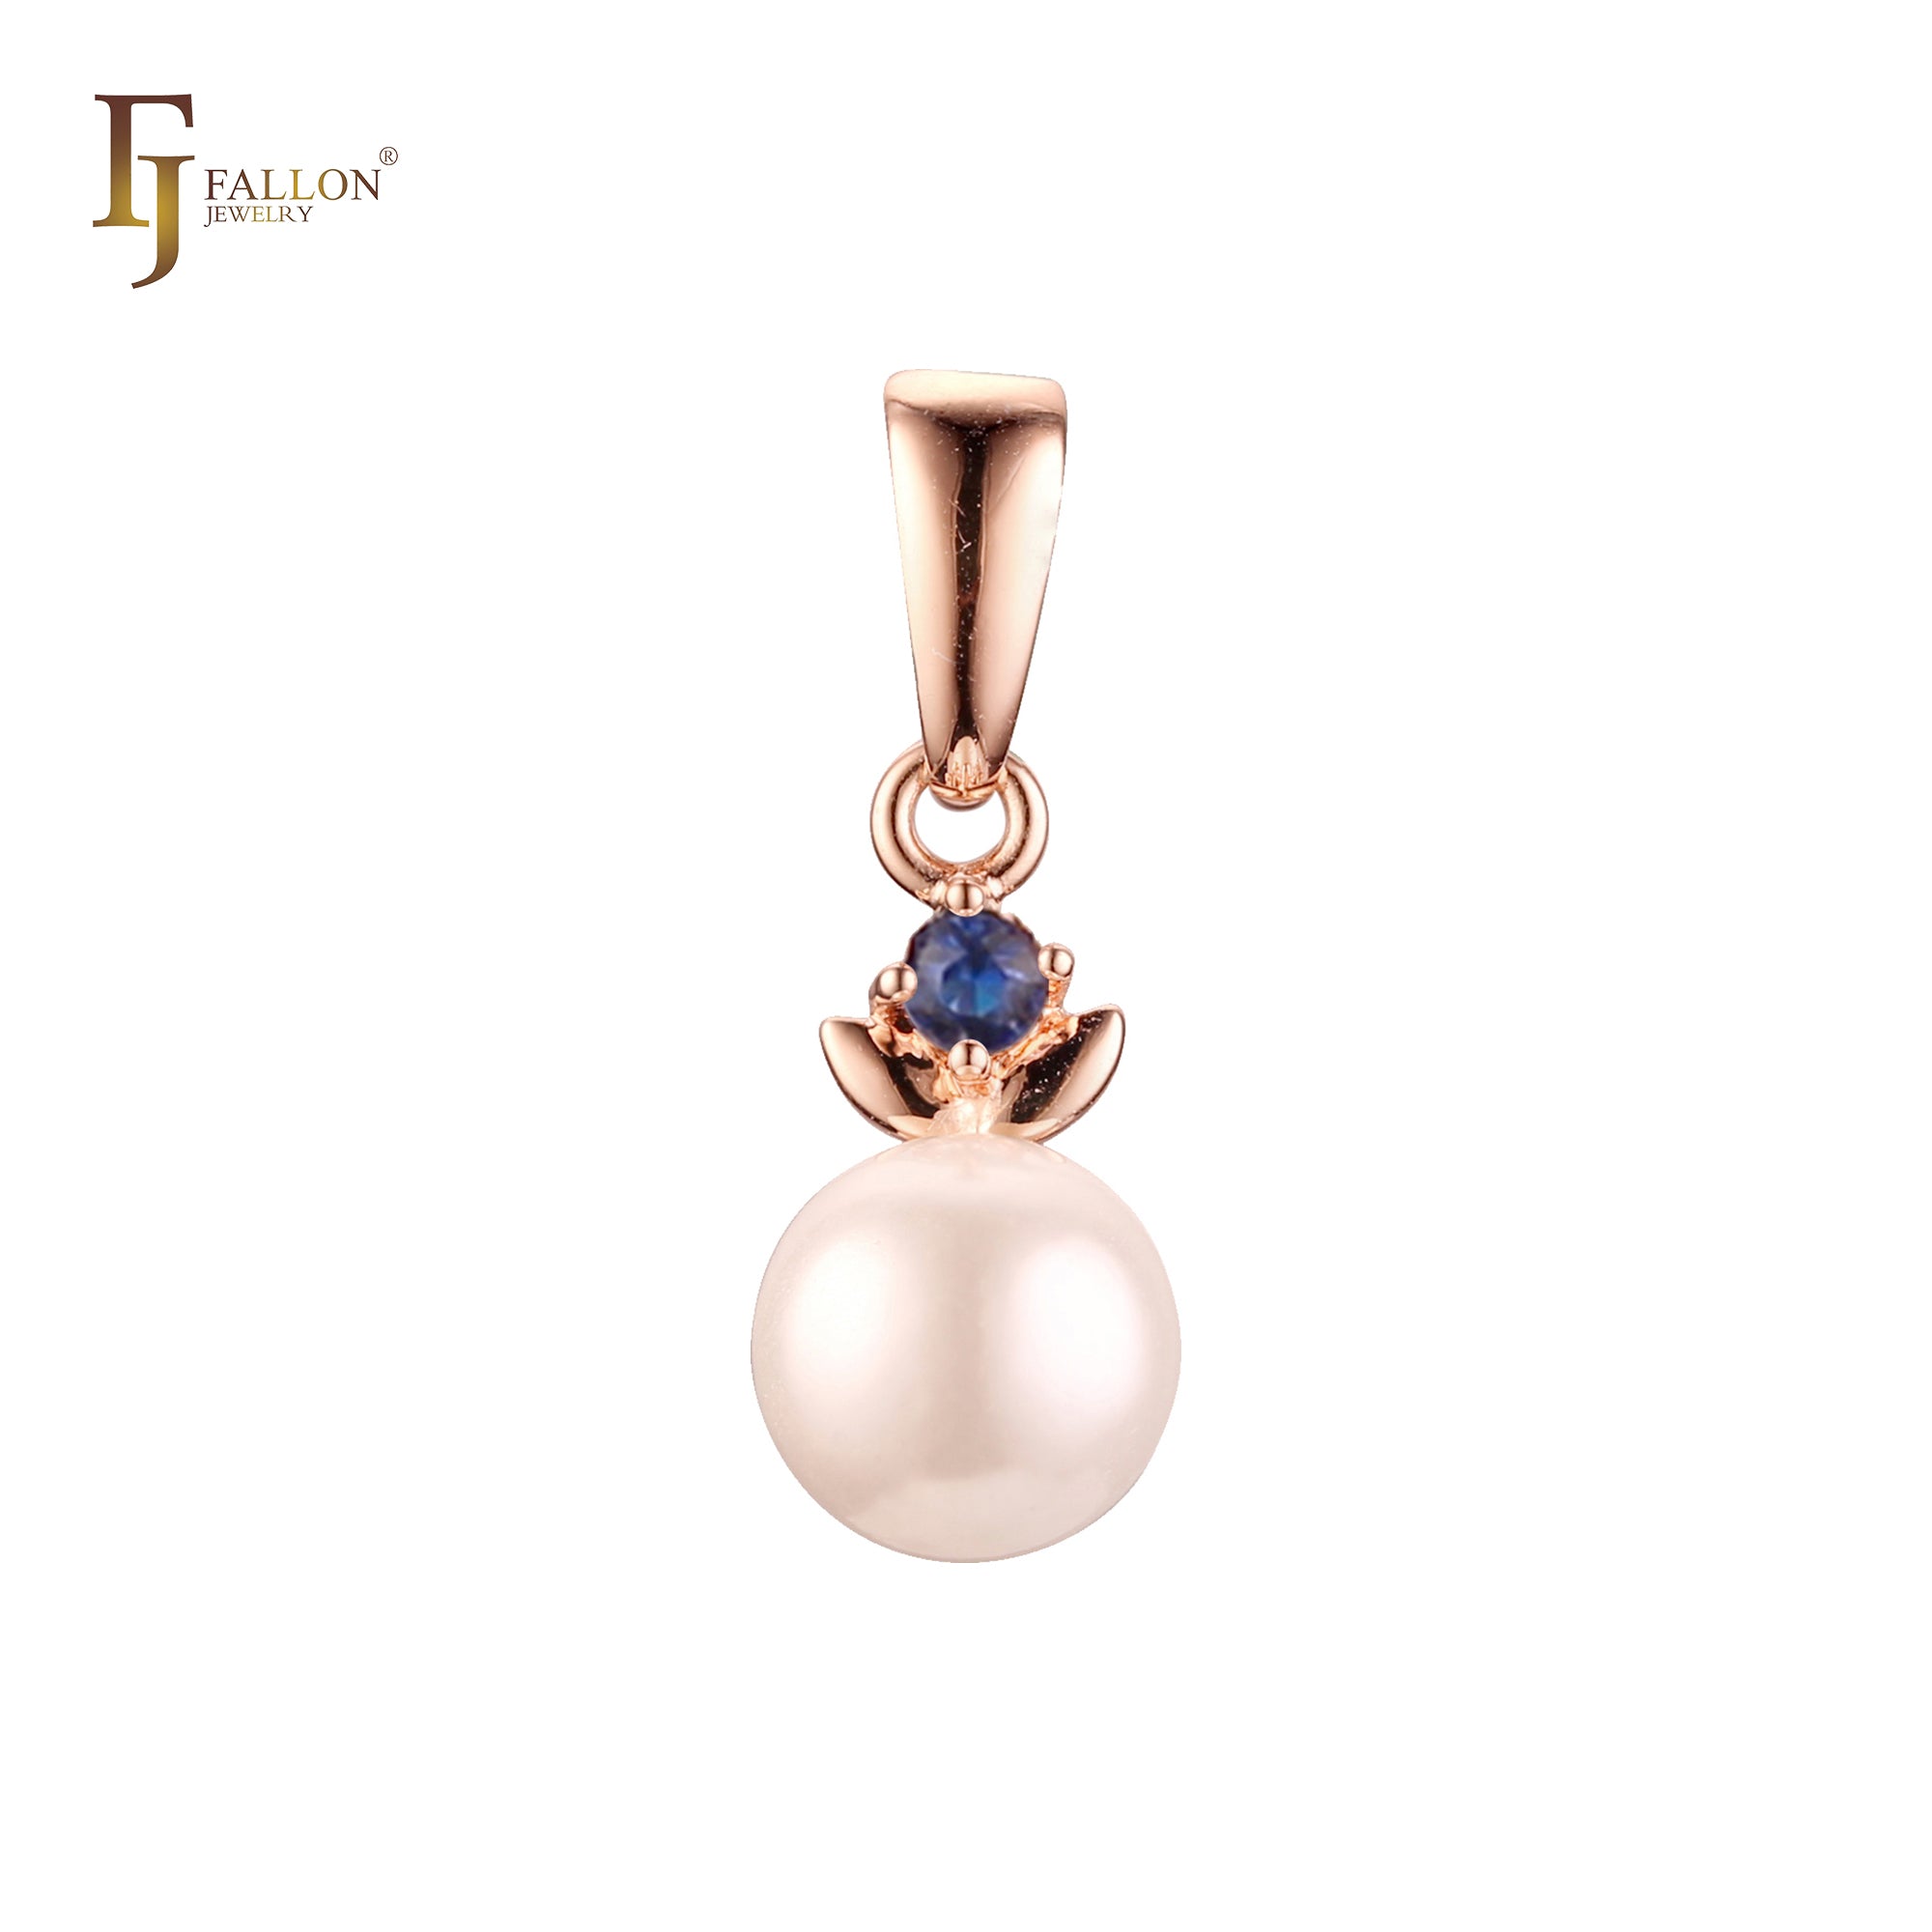 Solitaire white CZ leaves Pearl Rose Gold, 14K Gold pendant